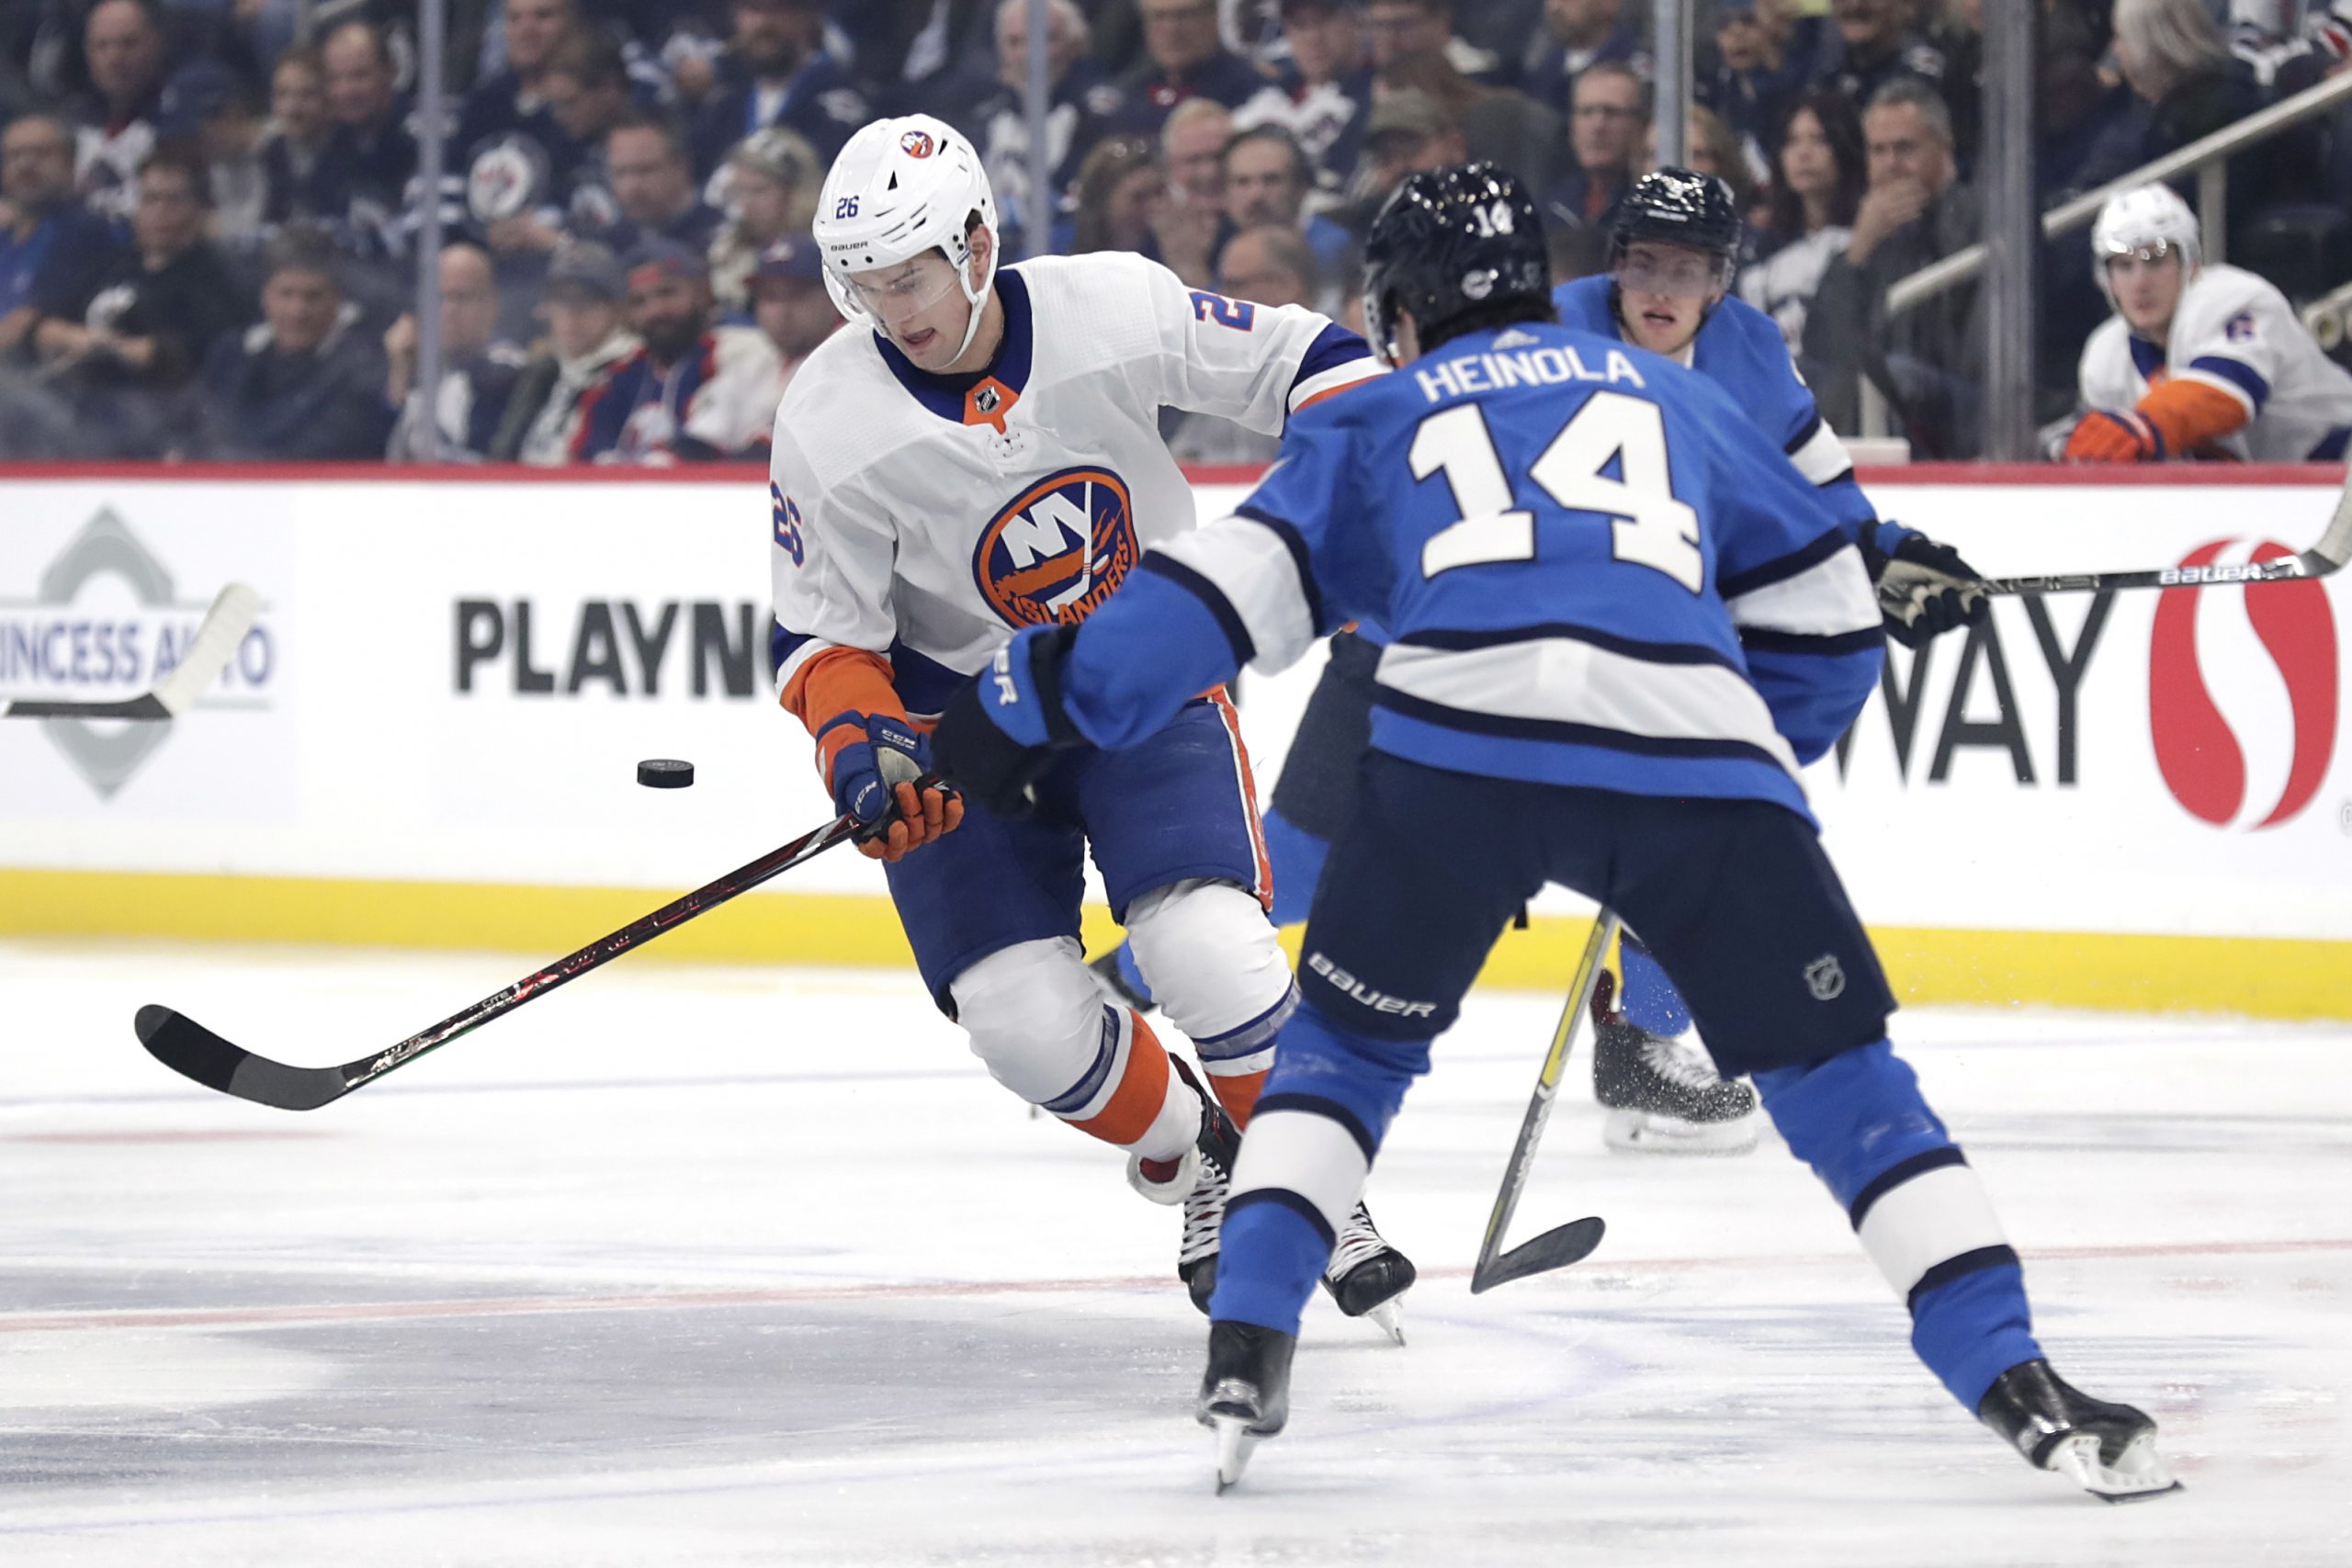 Oct 17, 2019; Winnipeg, Manitoba, CAN; New York Islanders right wing Oliver Wahlstrom (26) tries to control the puck from Winnipeg Jets defenseman Ville Heinola (14) in the first period at Bell MTS Place. Mandatory Credit: James Carey Lauder-USA TODAY Sports